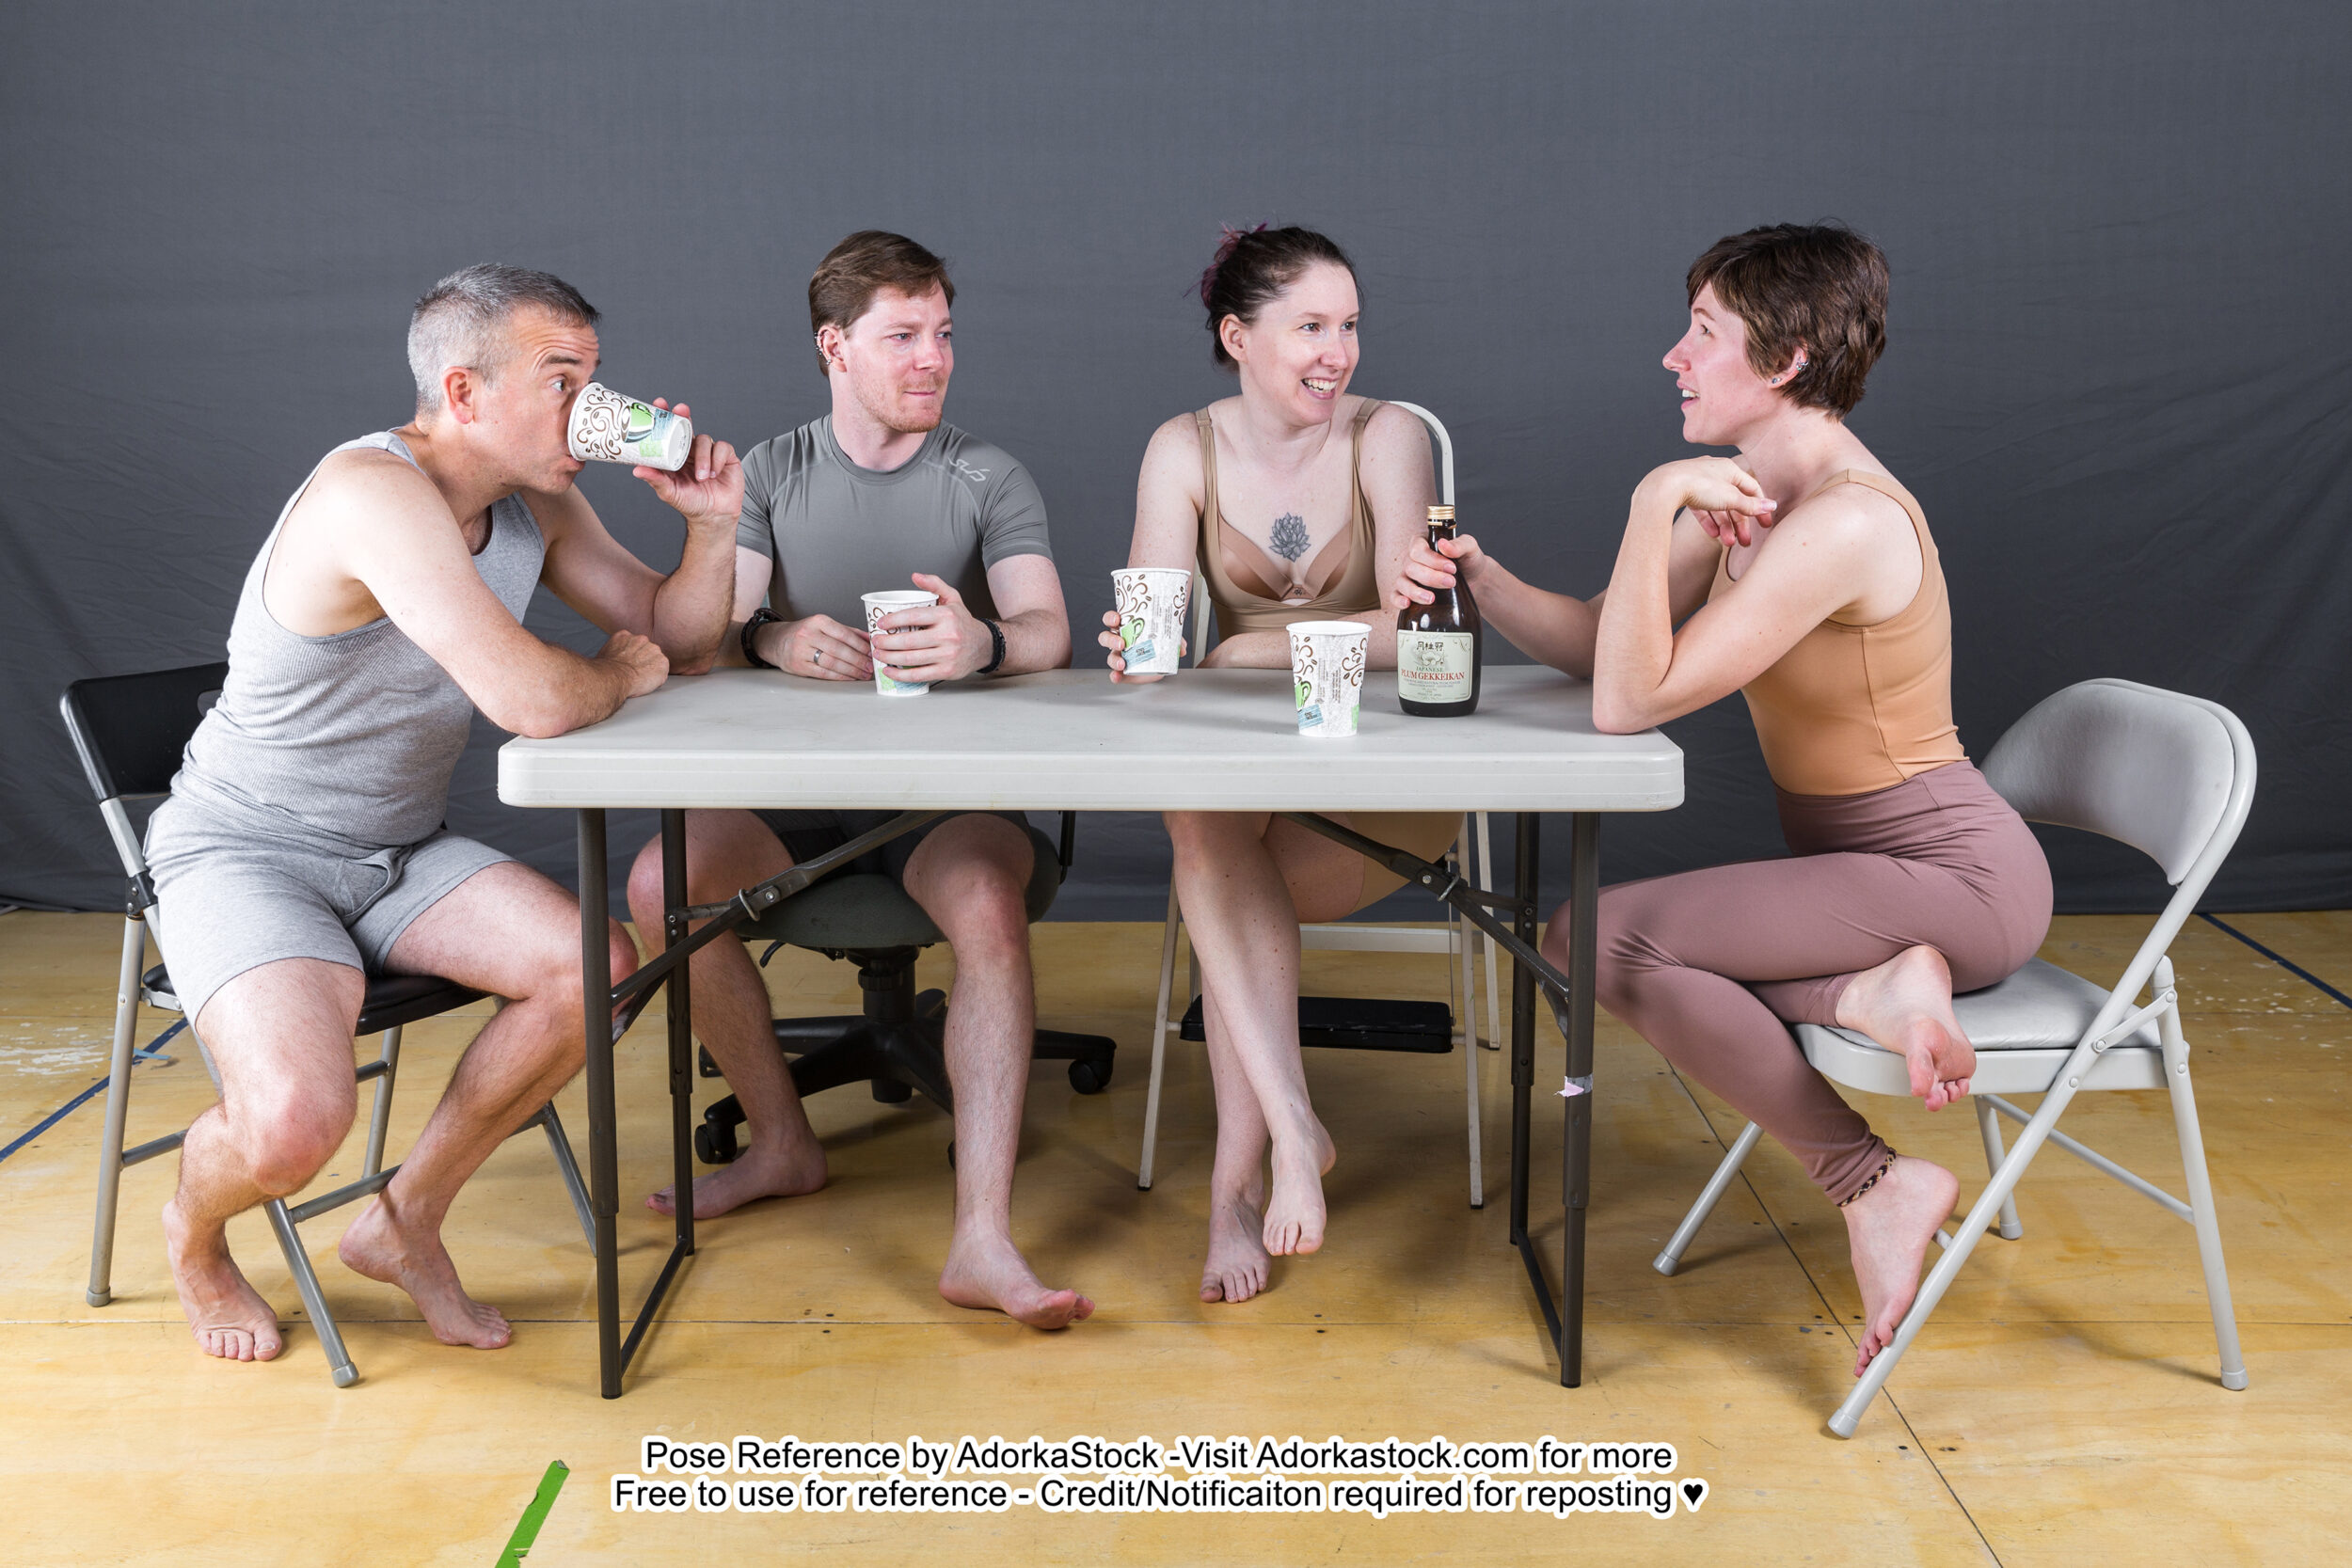 Group of four sitting around a table having some drinks and chatting pose reference